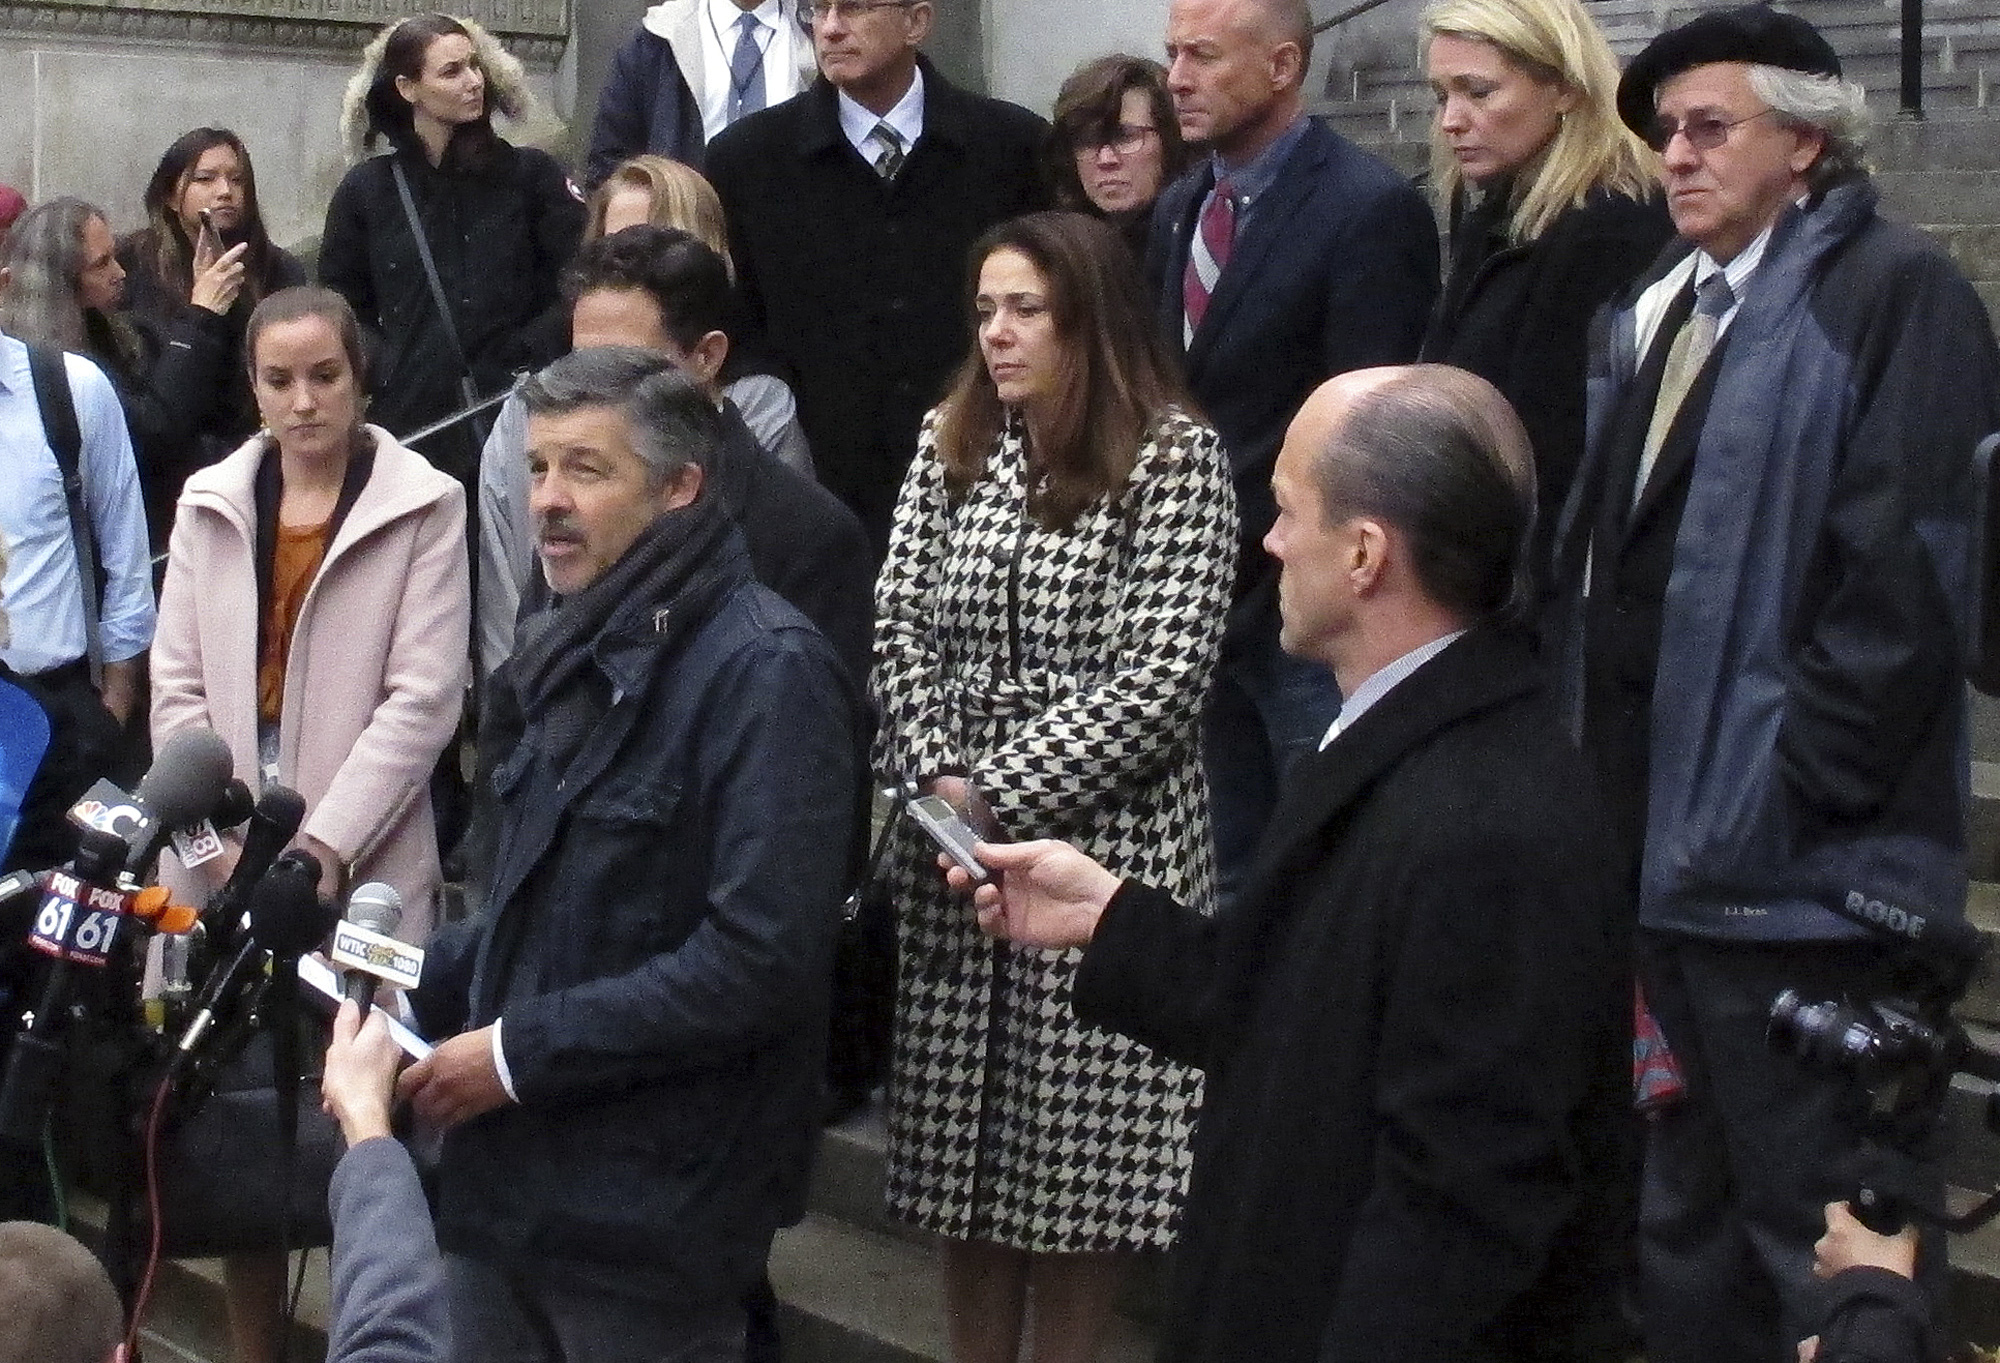 PHOTO: Ian Hockley, front left, father of Dylan Hockley, one of the children killed in the 2012 Sandy Hook Elementary School shooting, speaks outside the Connecticut Supreme Court, Nov. 14, 2017, in Hartford, Conn. 